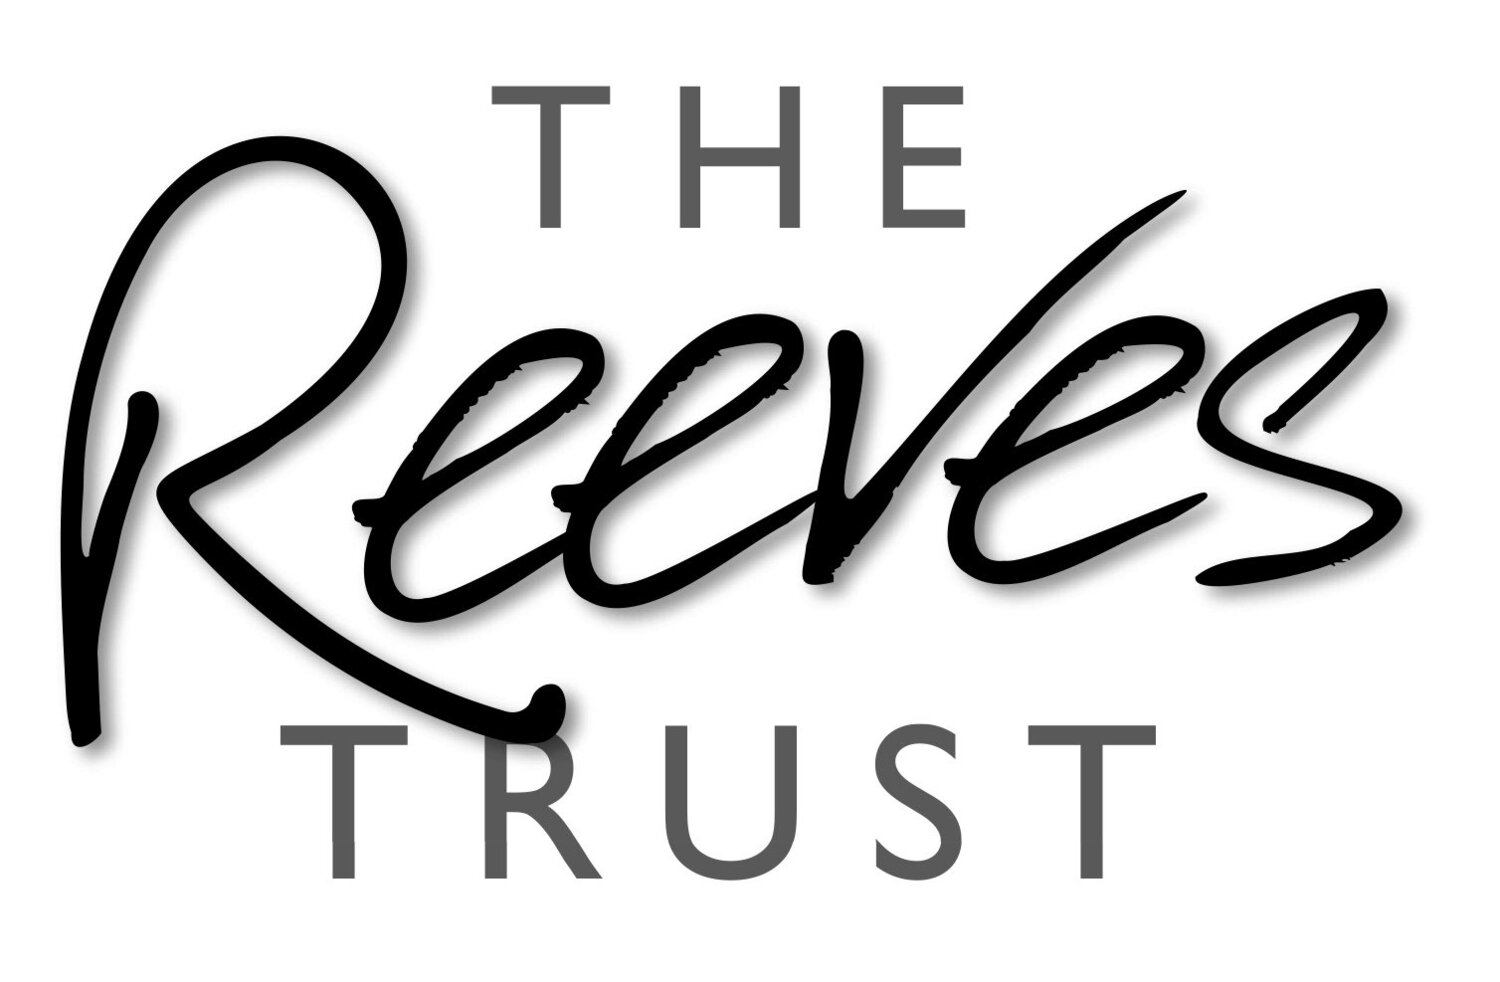 The Reeves Trust